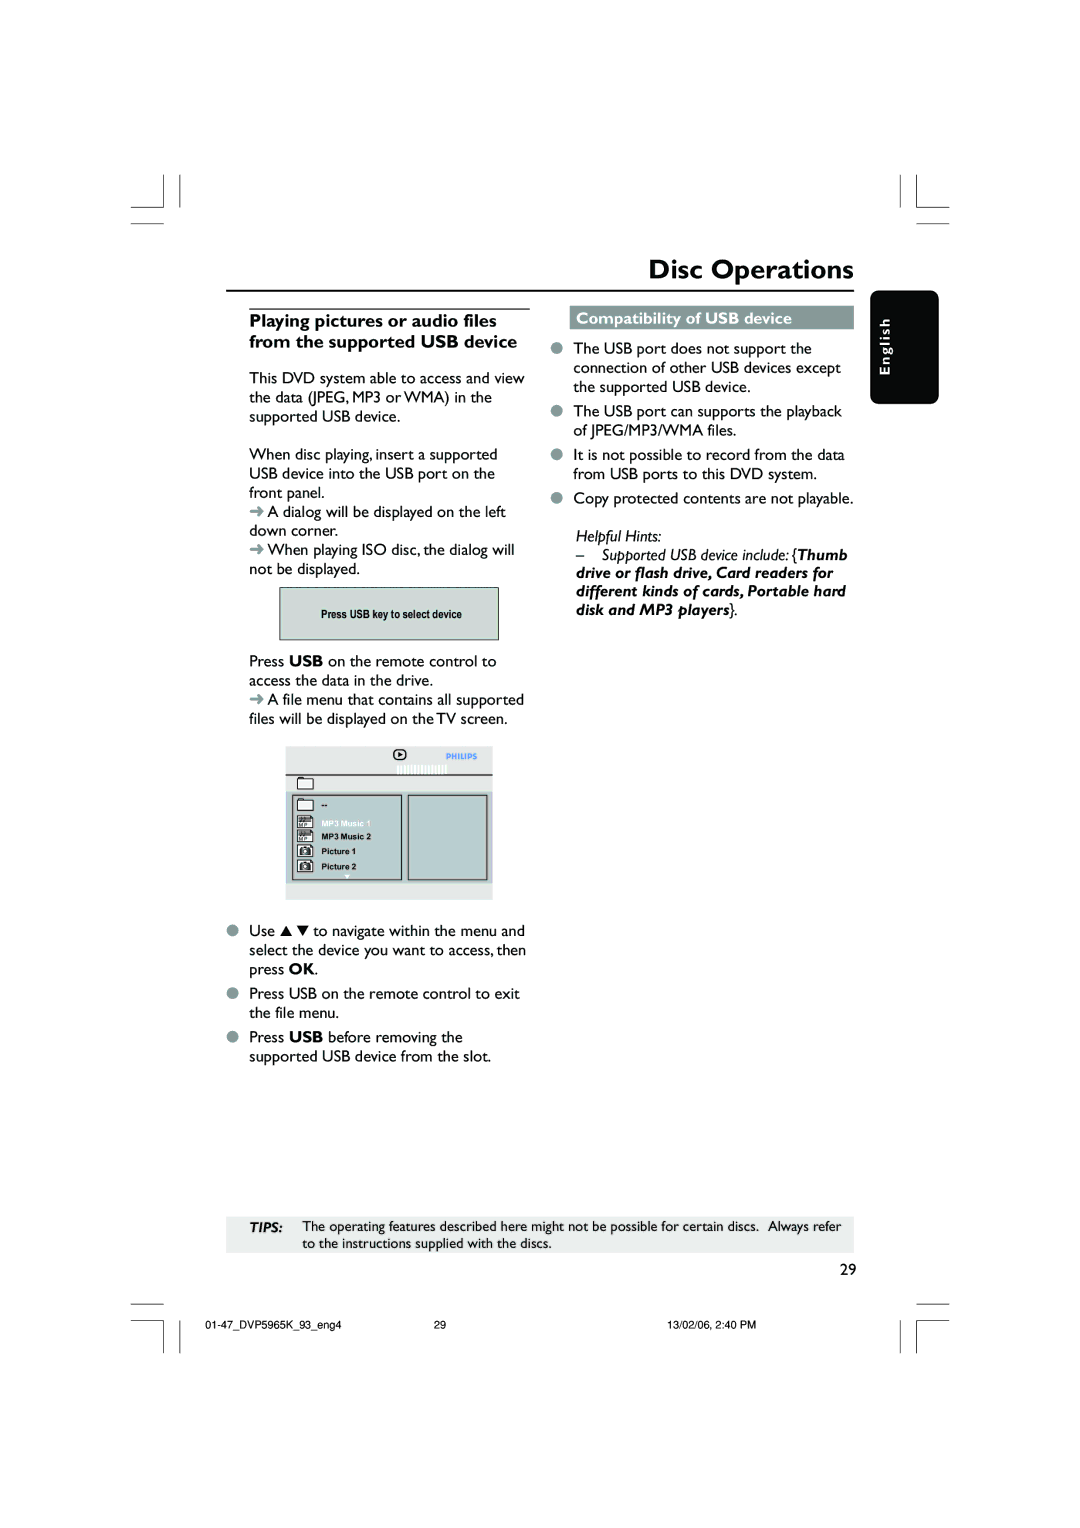 Philips DVP 5965K user manual Compatibility of USB device, Copy protected contents are not playable 